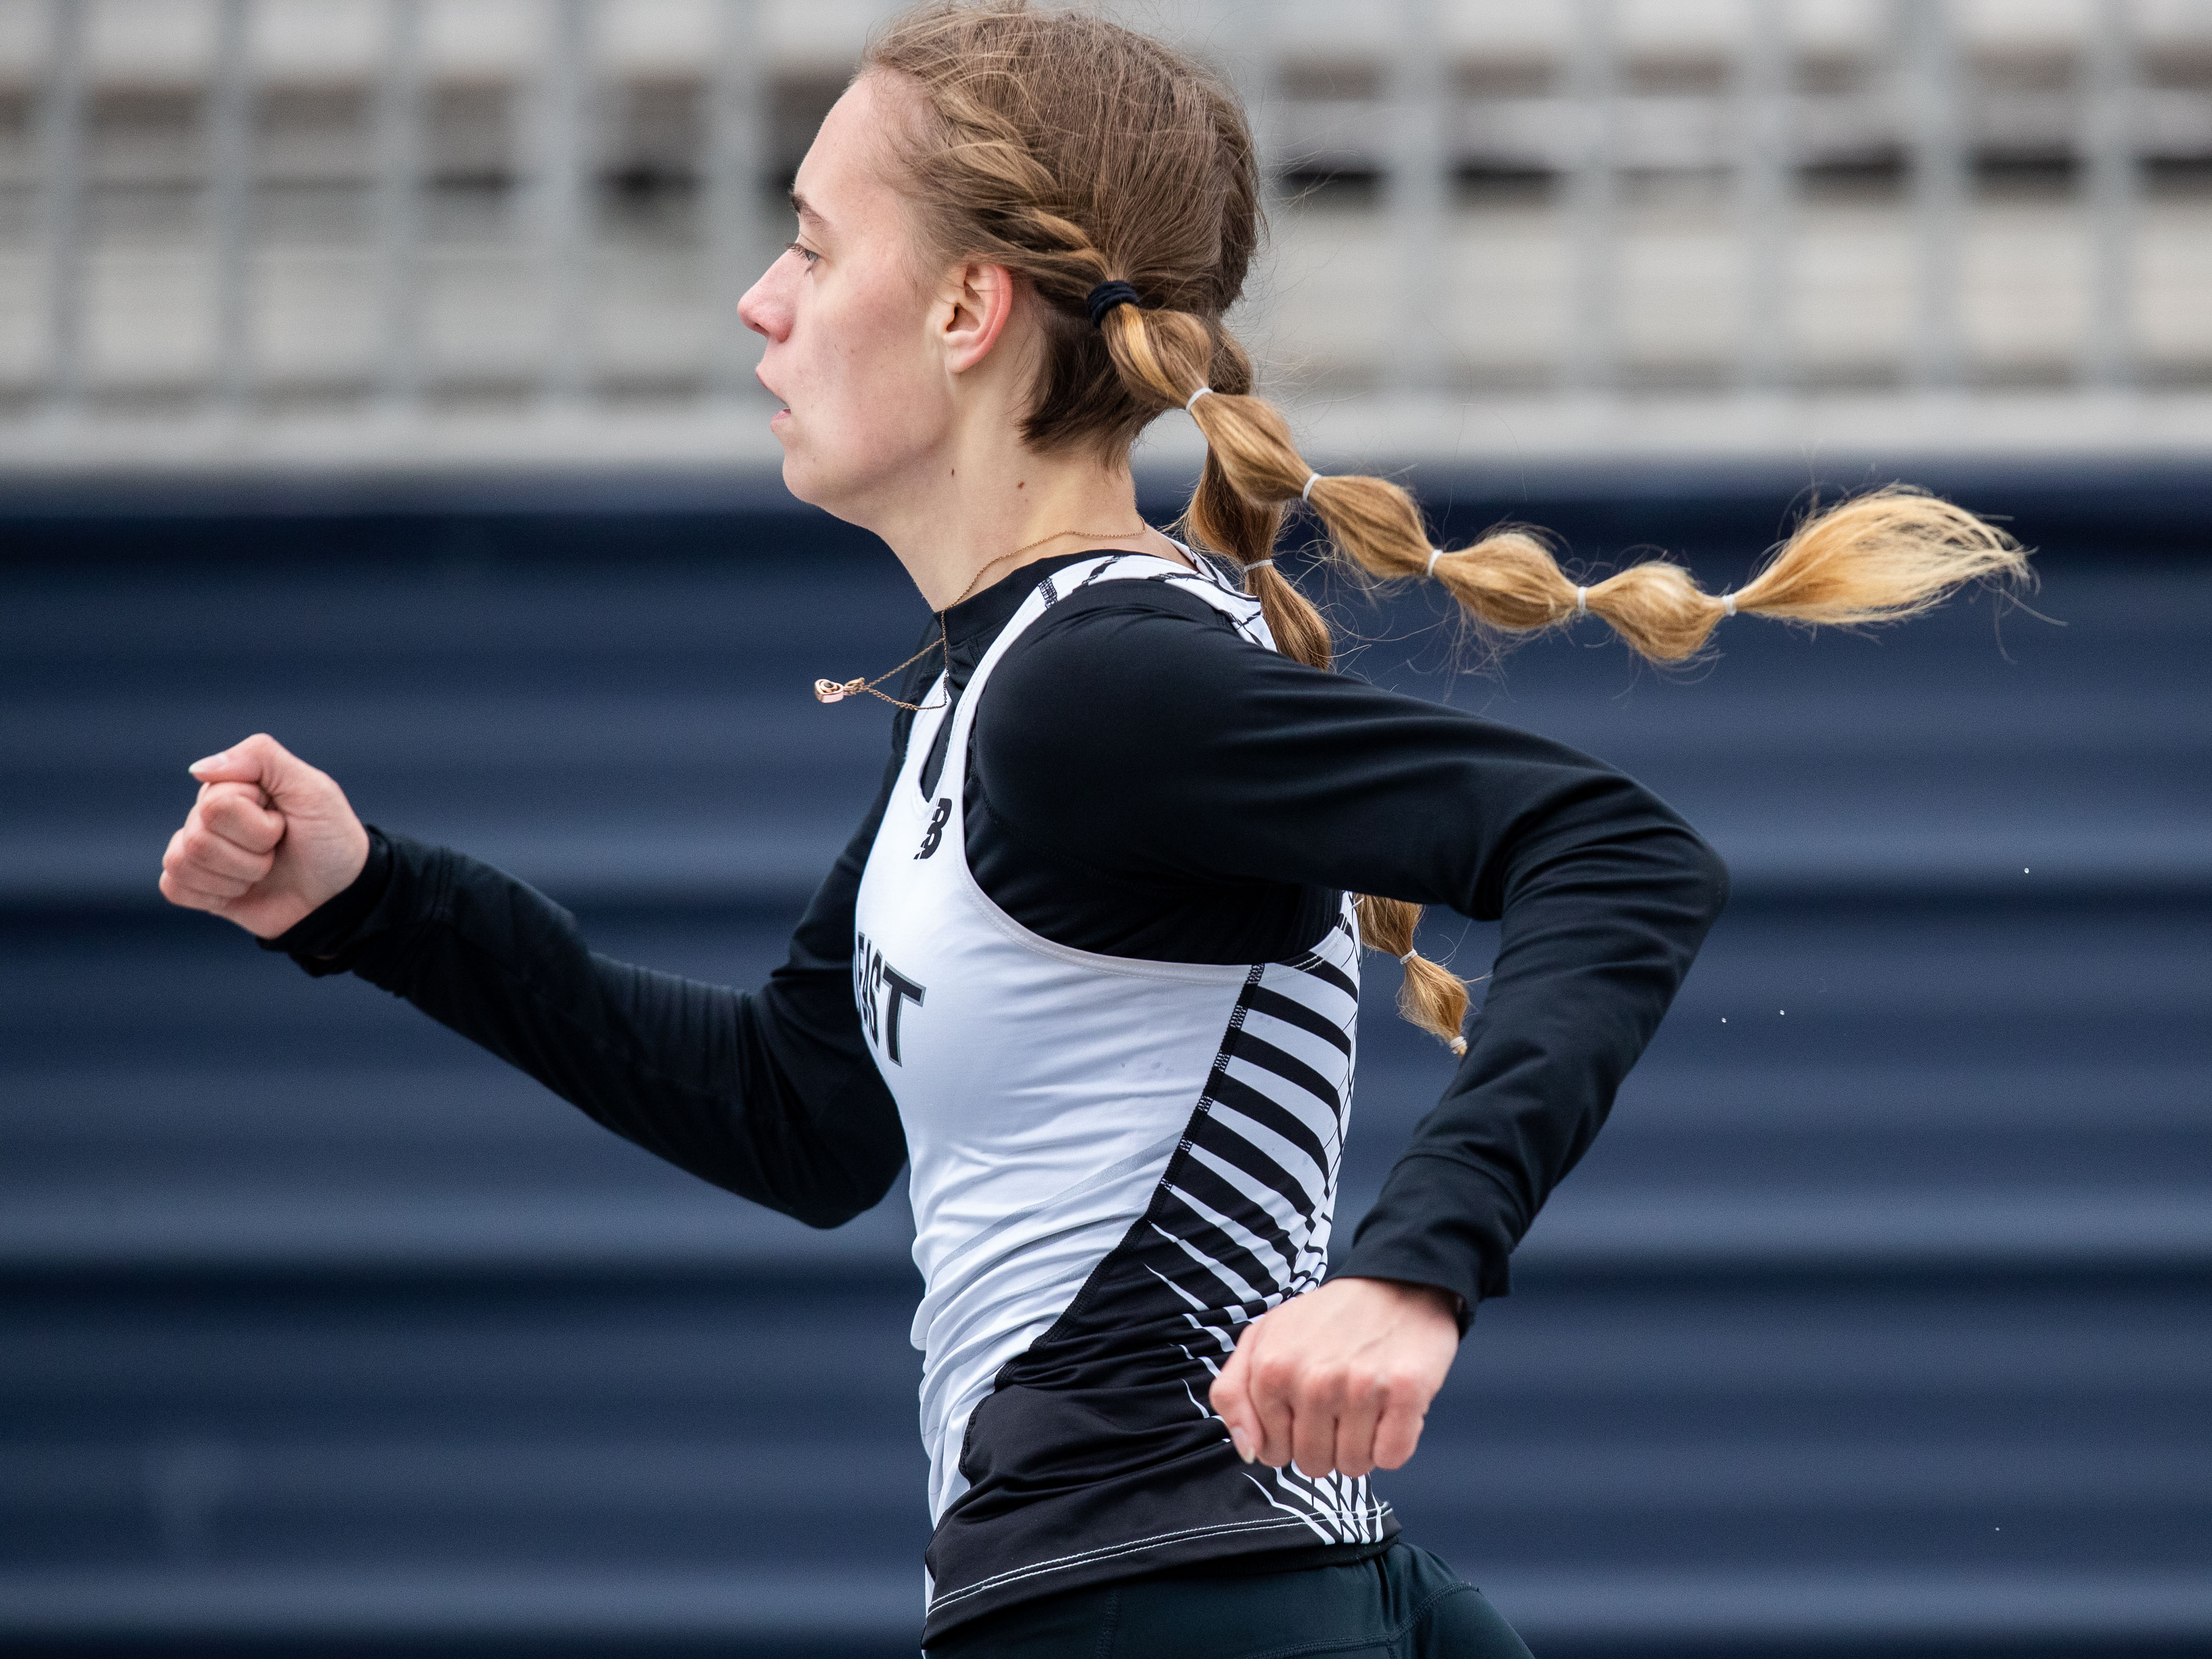 Central Dauphin East’s Madison Livingston finishes fourth in the 400 meter race at the 2023 Tim Cook Memorial Invitational track & field meet at Chambersburg, Pa., Mar. 25, 2023.Mark Pynes | pennlive.com